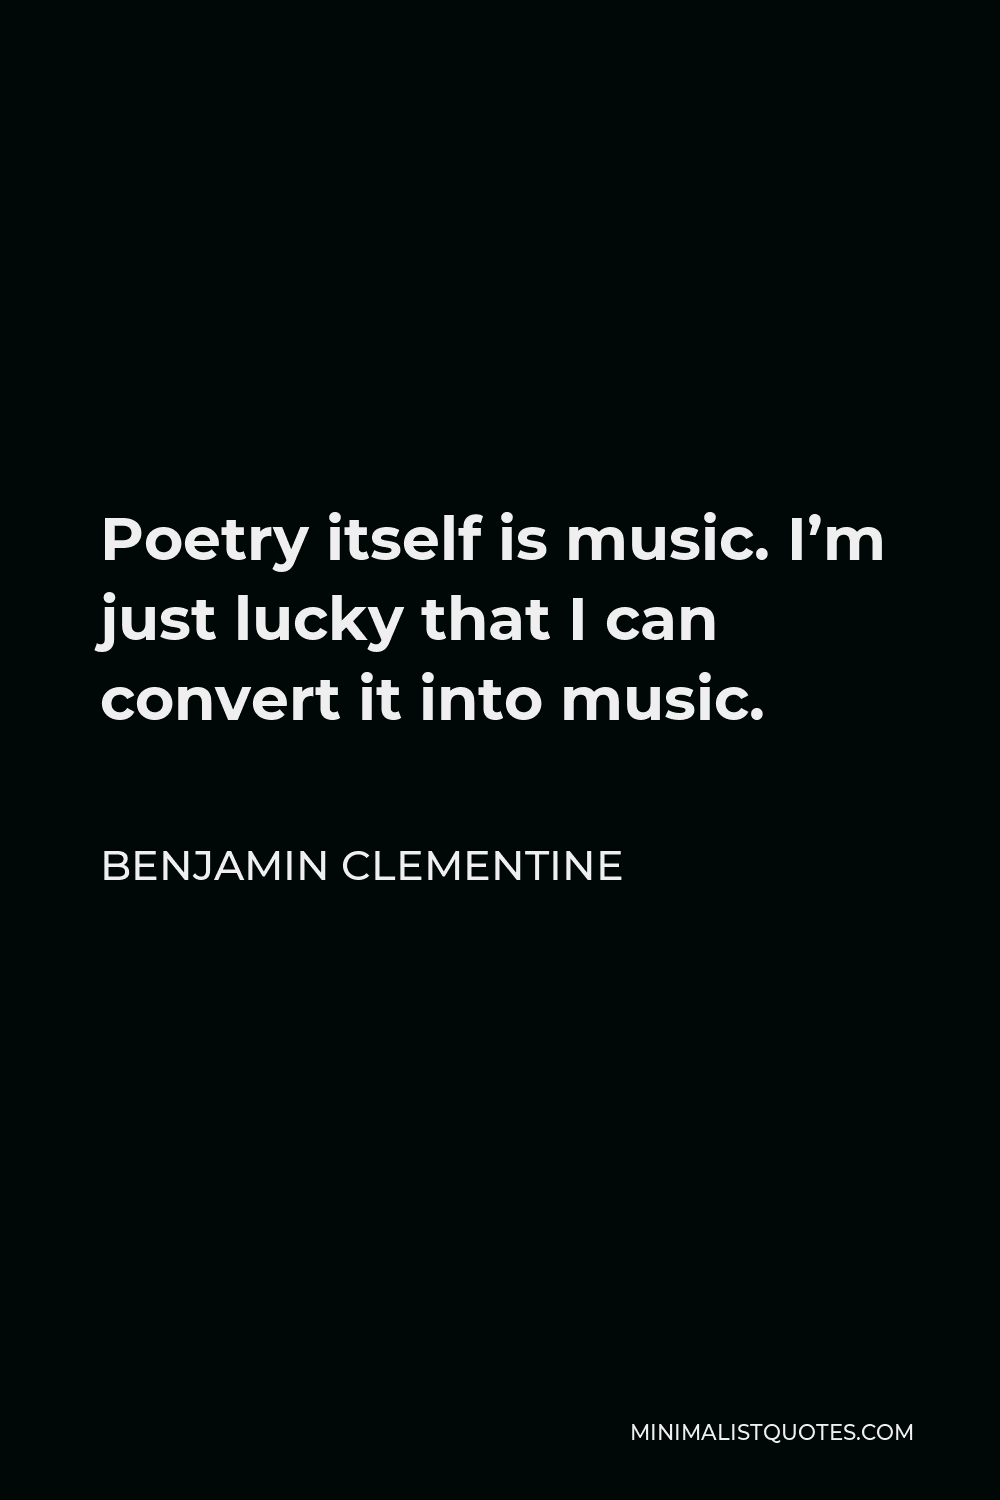 Benjamin Clementine Quote - Poetry itself is music. I’m just lucky that I can convert it into music.